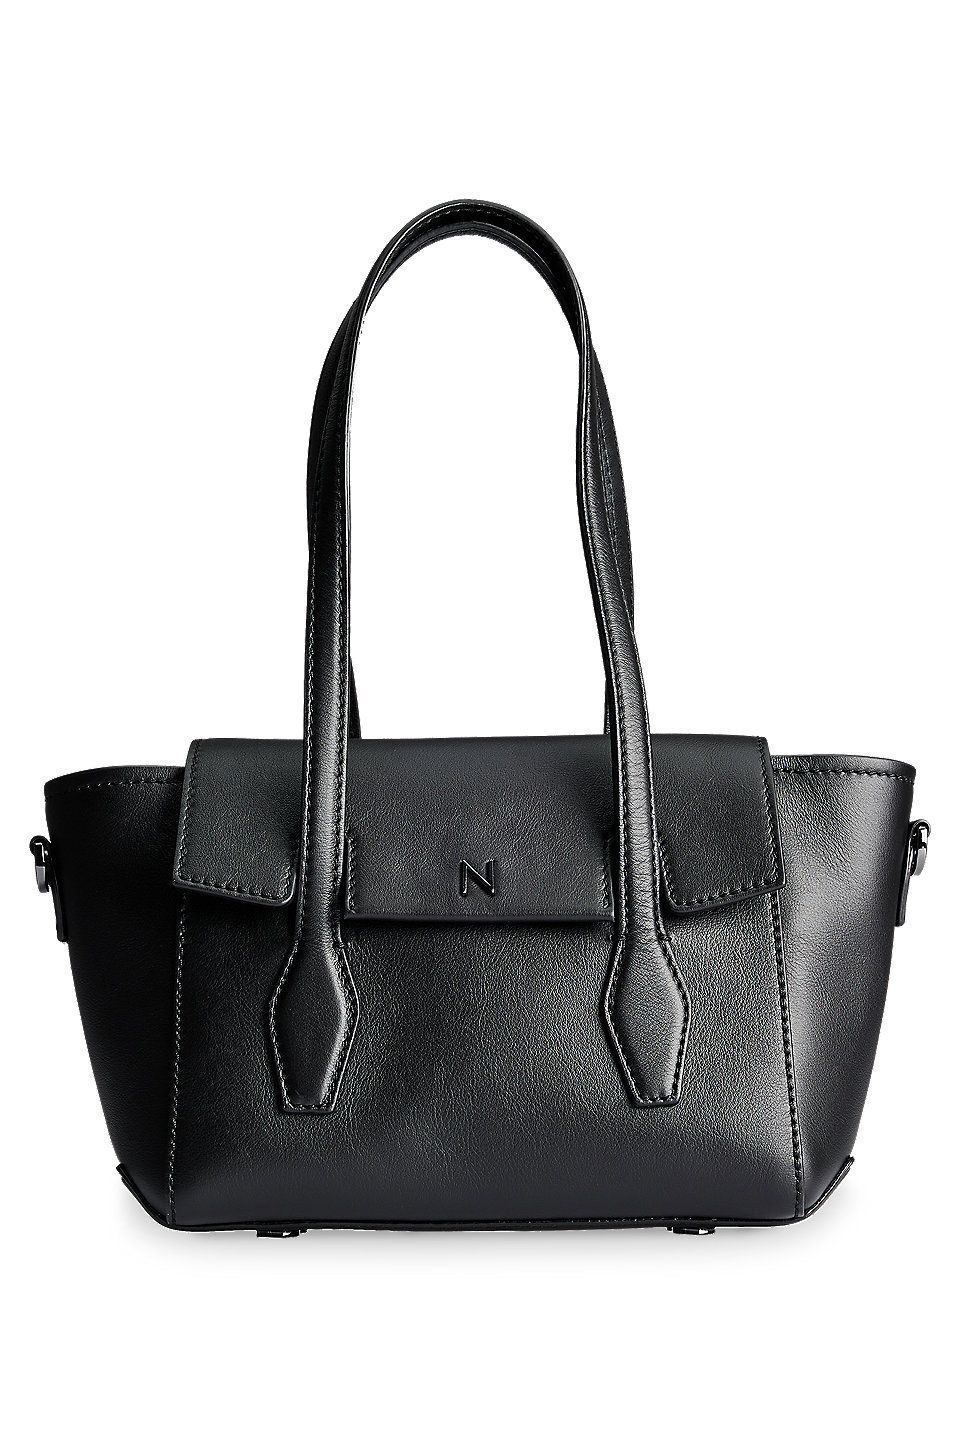 NAOMI x BOSS leather tote bag with branded trims | Hugo Boss (US)